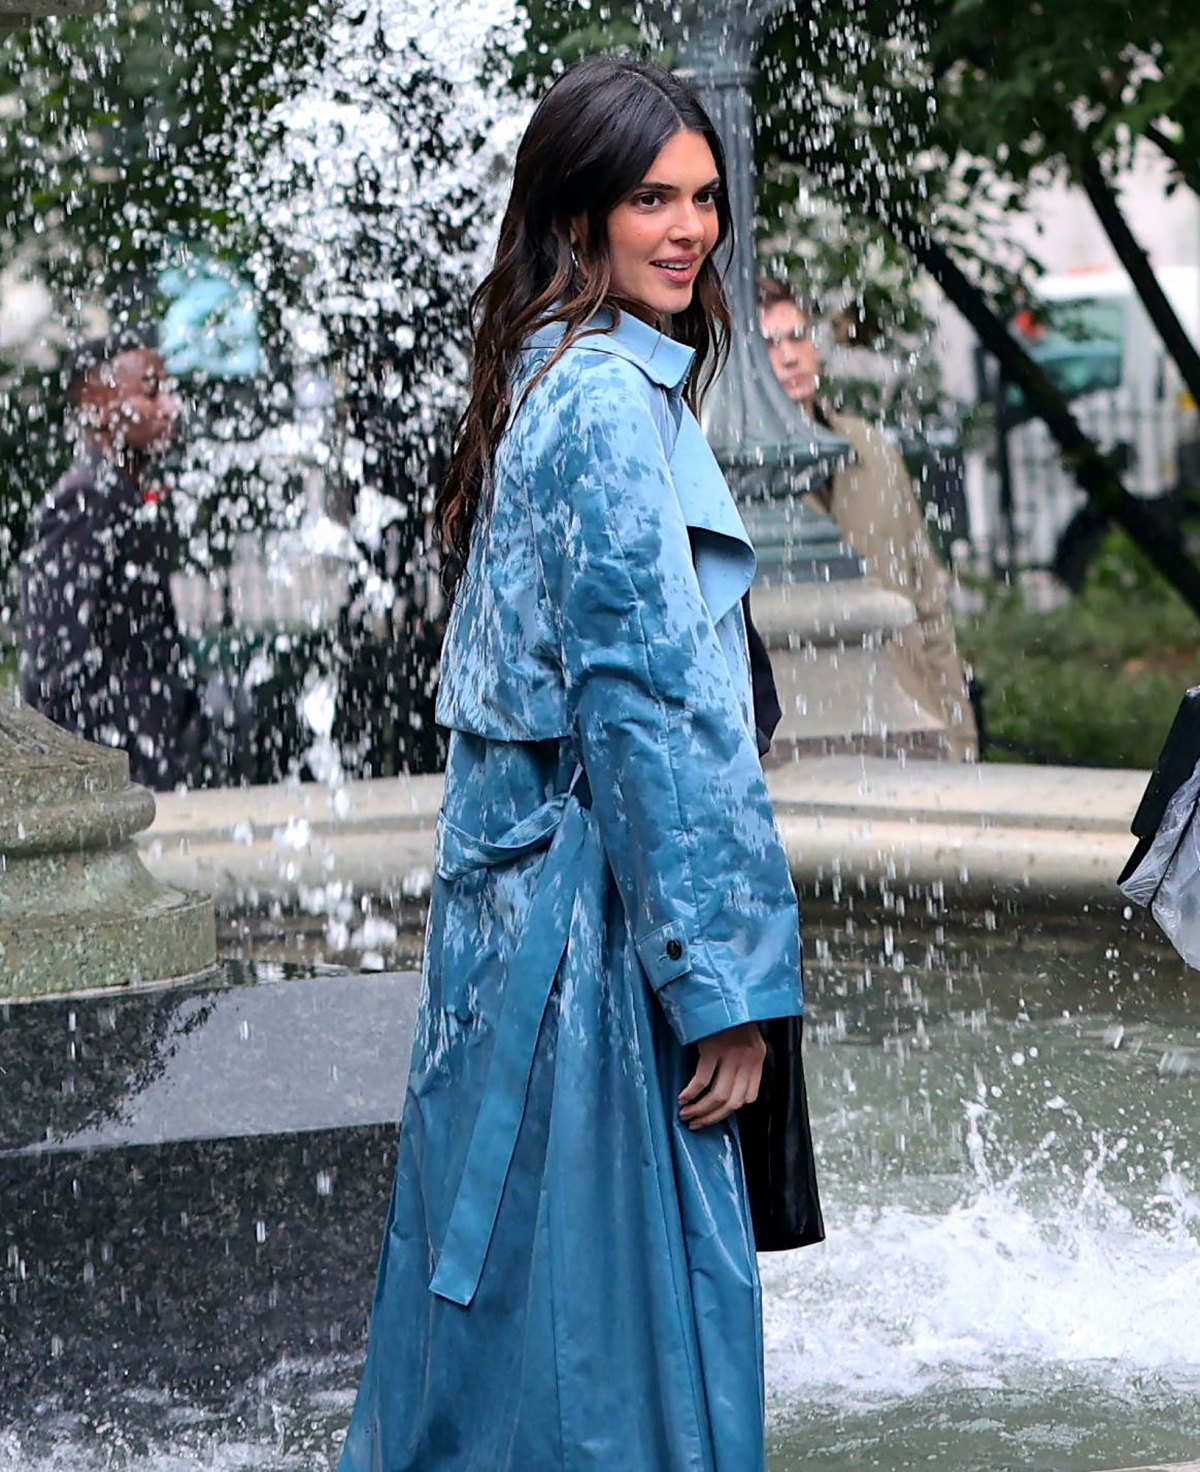 Kendall Jenner jumped into a fountain fully clothed